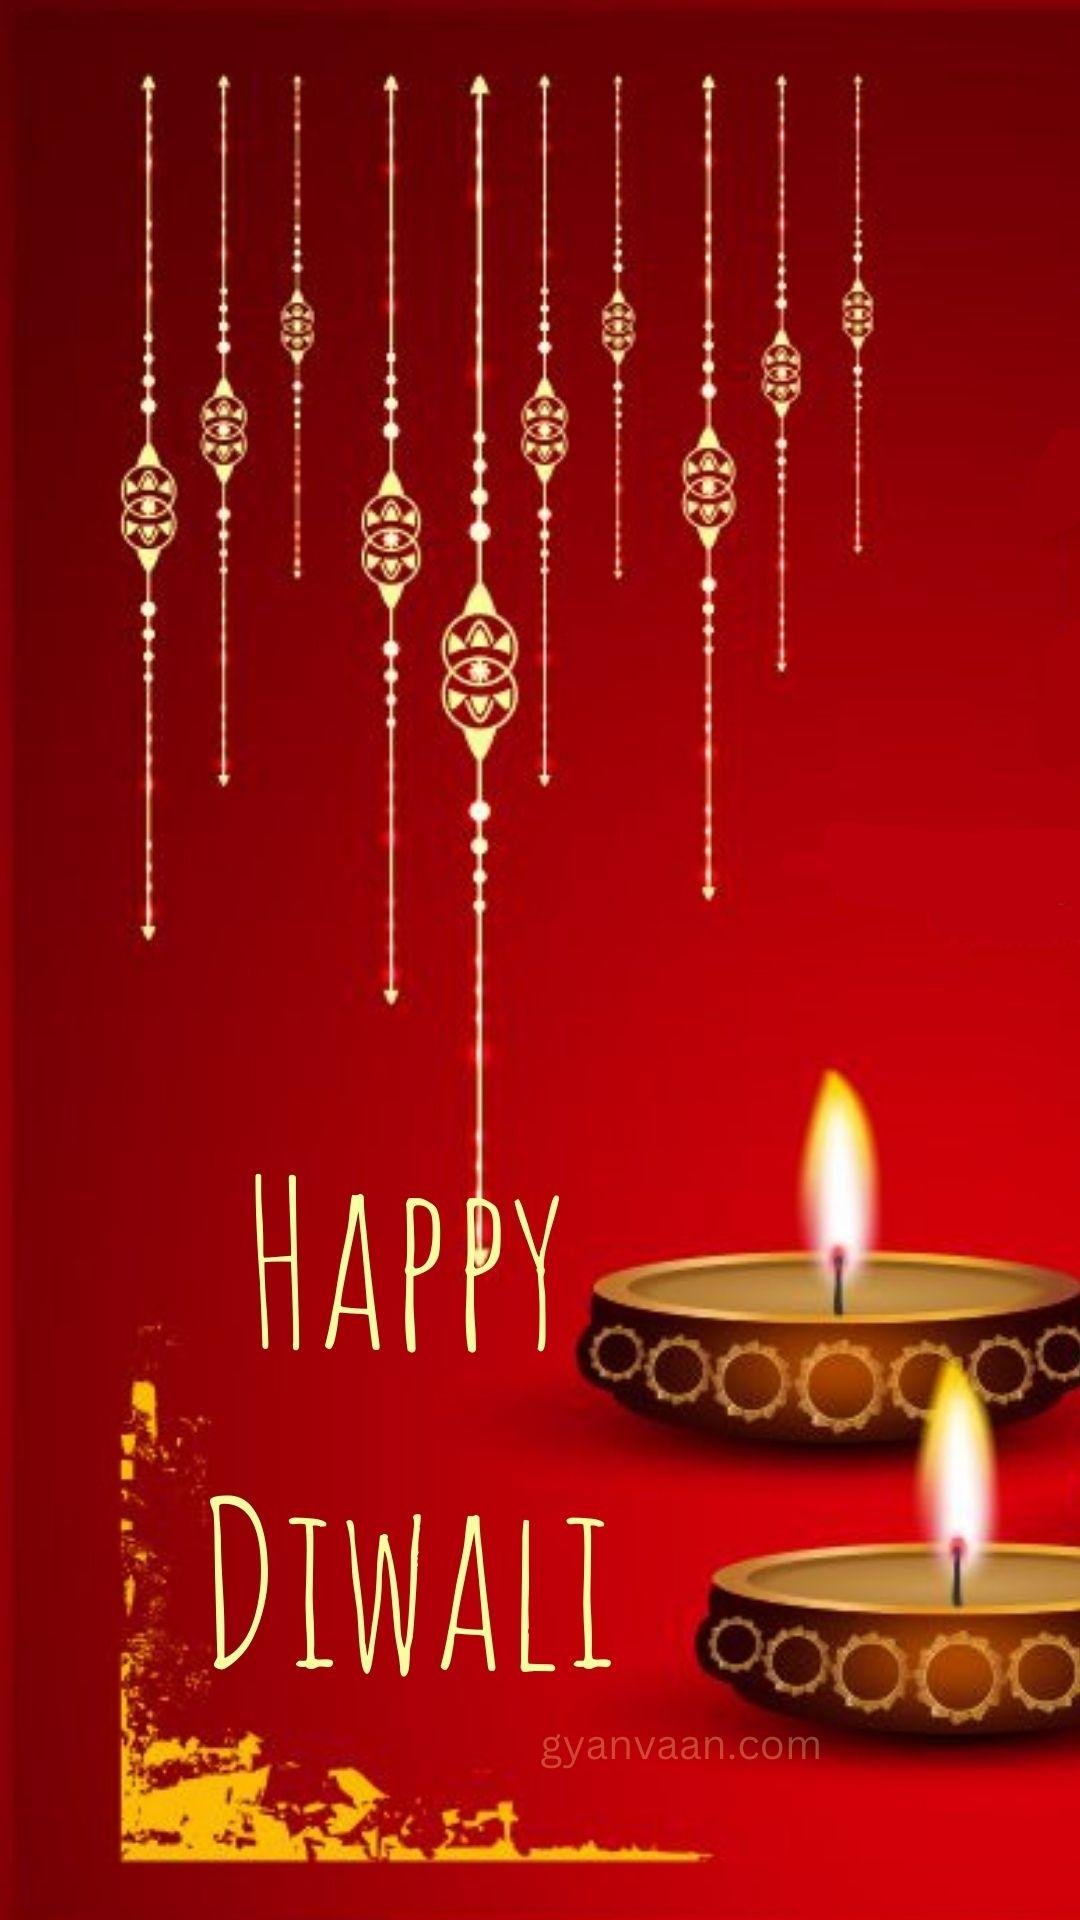 Diwali Quotes In Hindi With Wishes6 - Diwali Quotes In Hindi